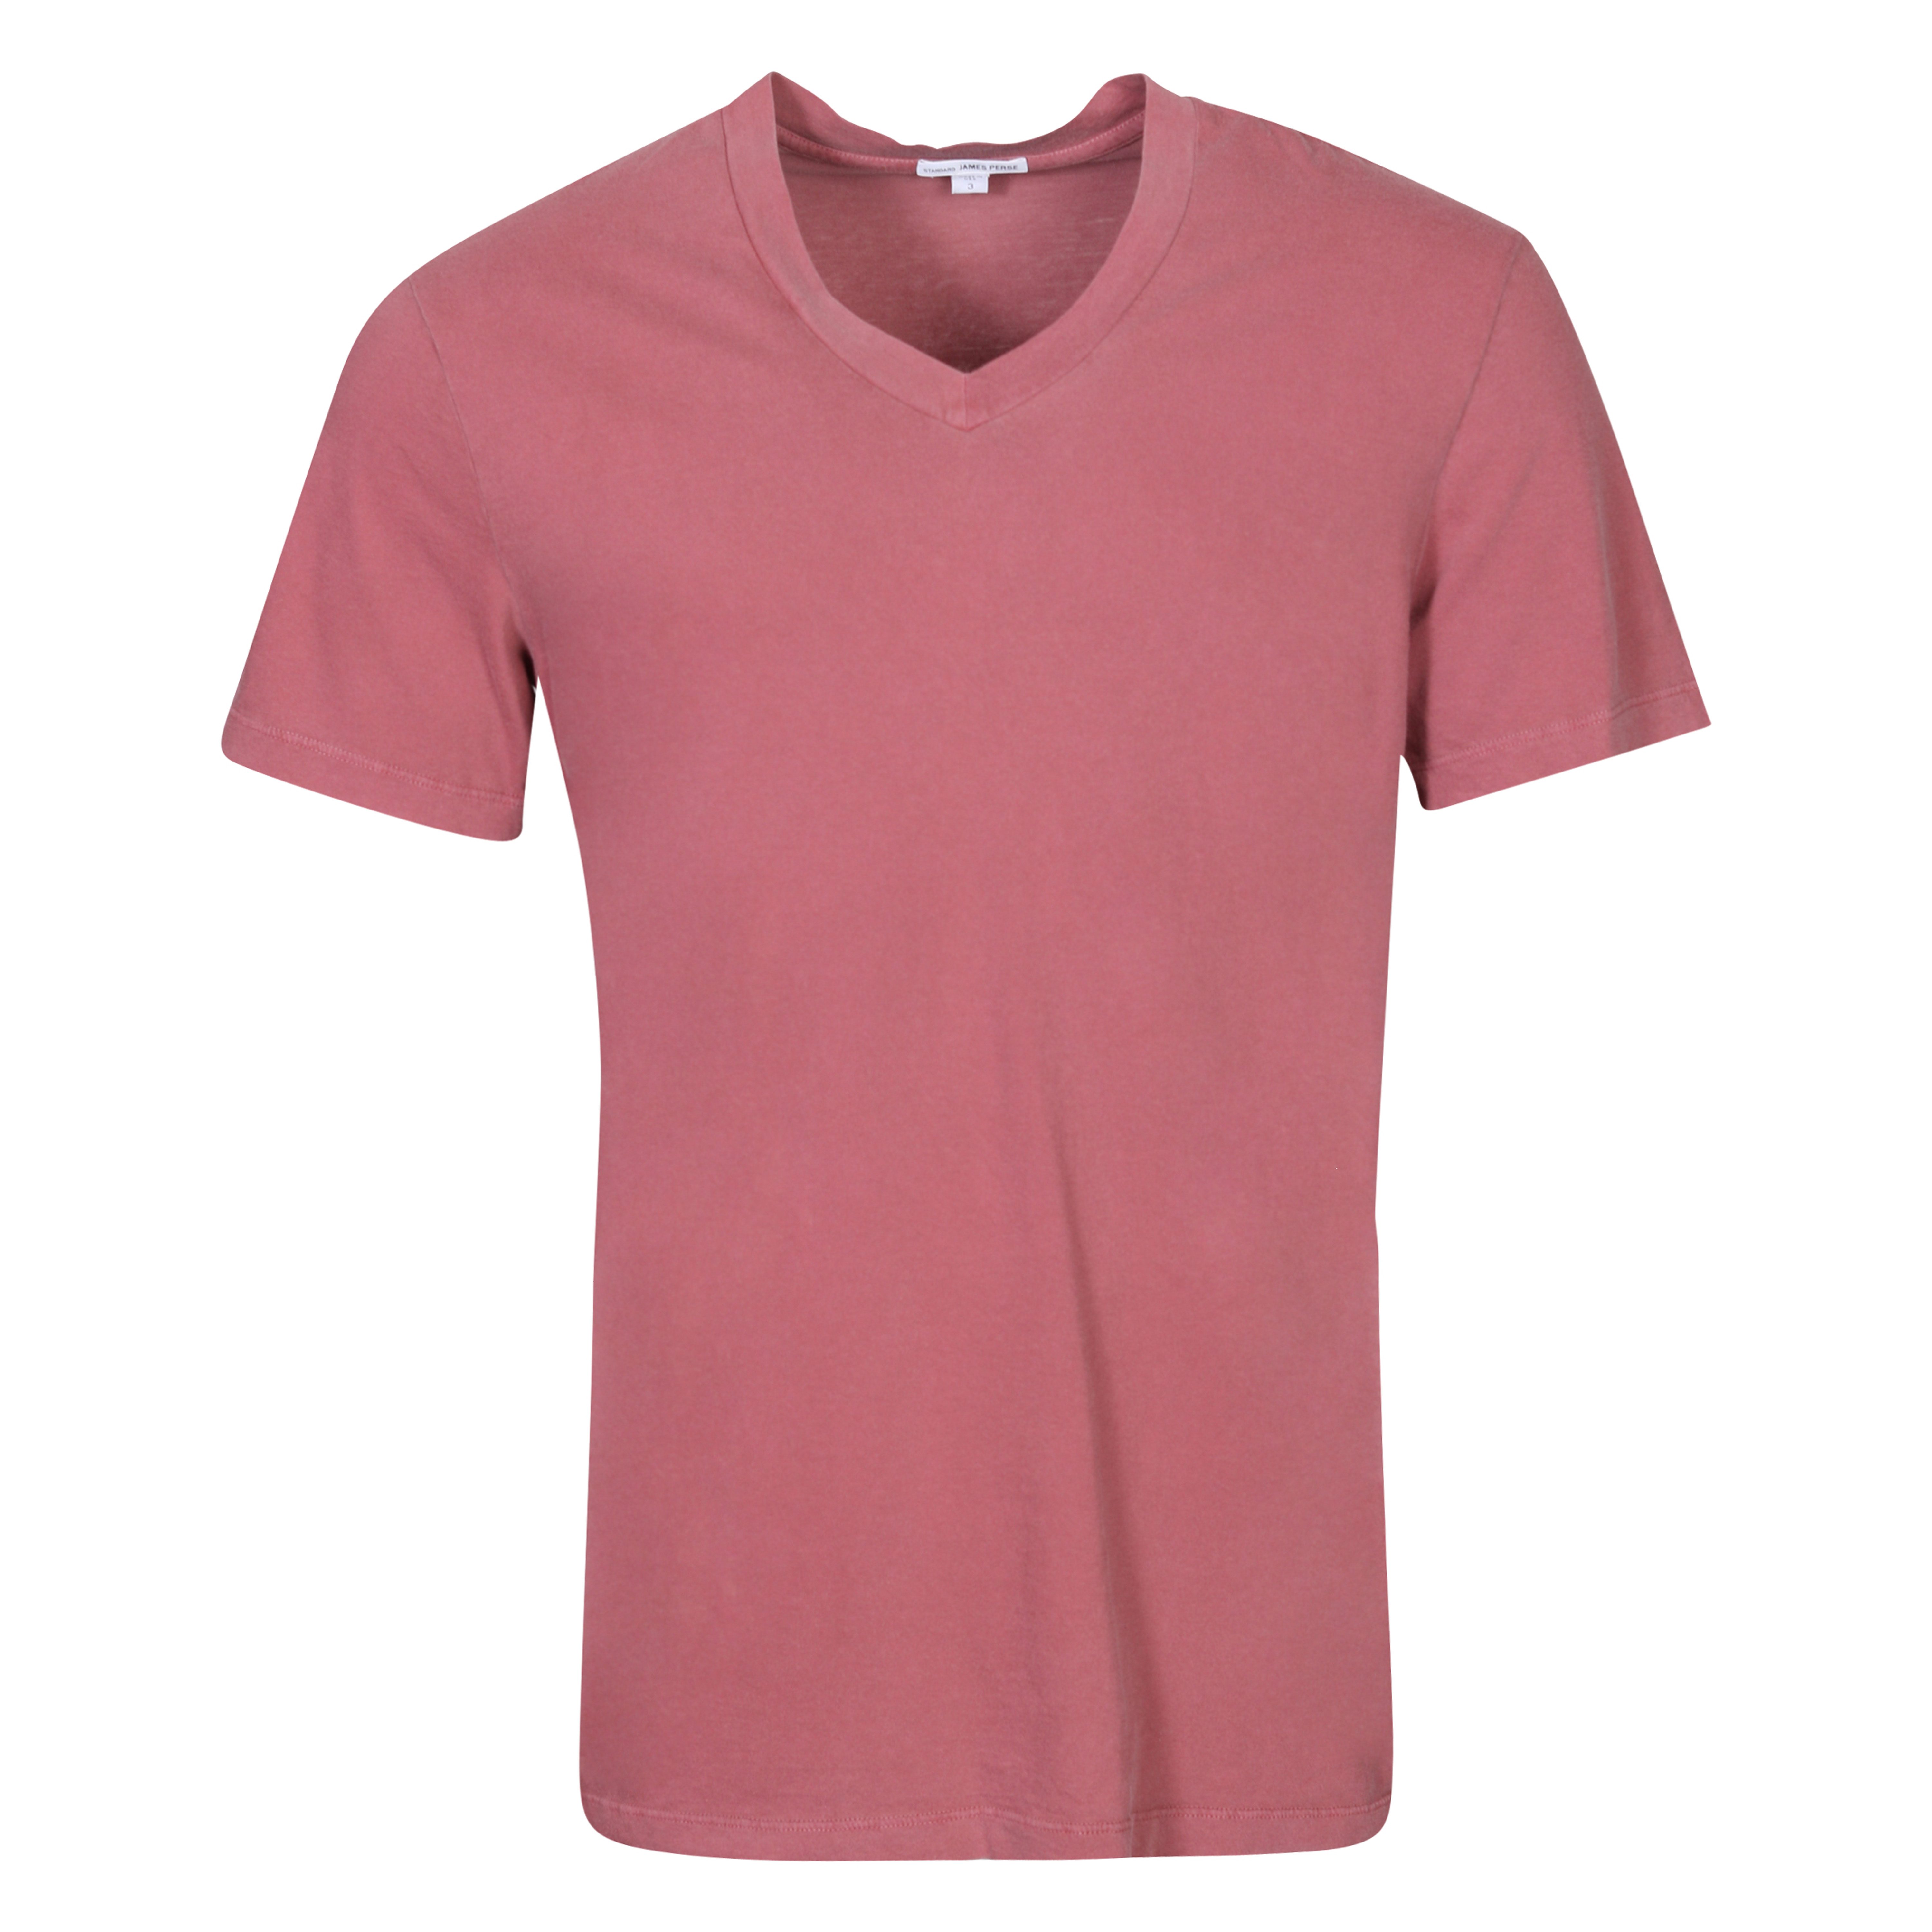 James Perse T-Shirt V-Neck in Mars